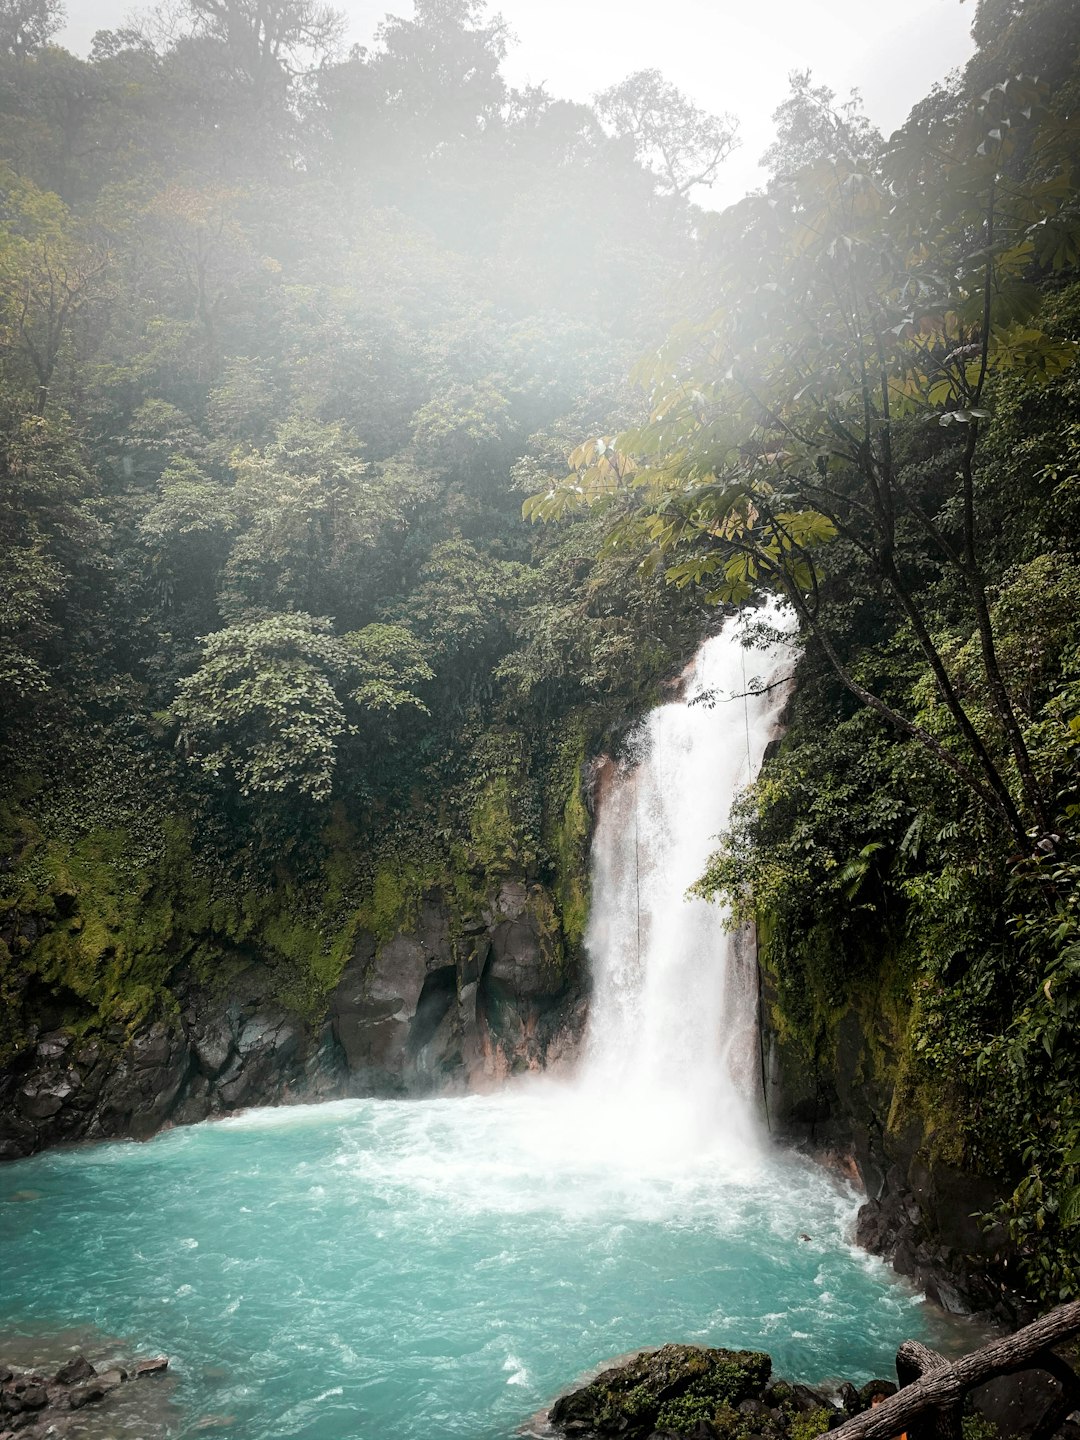 travelers stories about Waterfall in Rio Celeste Hideaway, Costa Rica